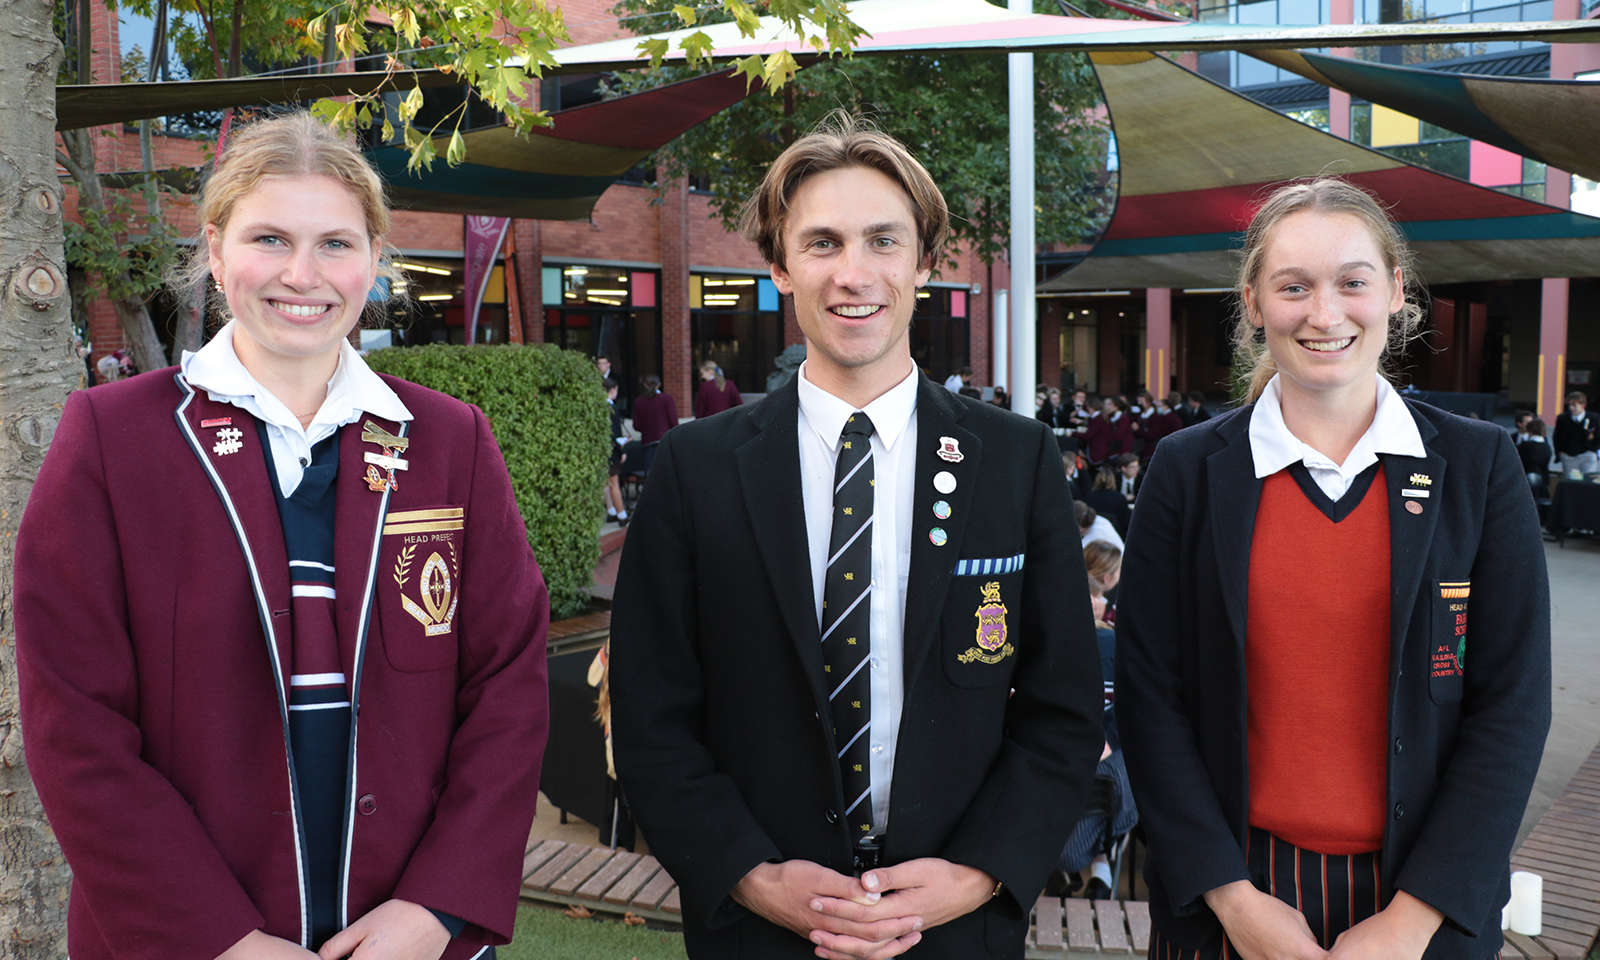 Year 12 Head Prefects from Collegiate, Hutchins and Fahan. Left to right: Victoria Fish, William Zeeman and Laura Cooper.